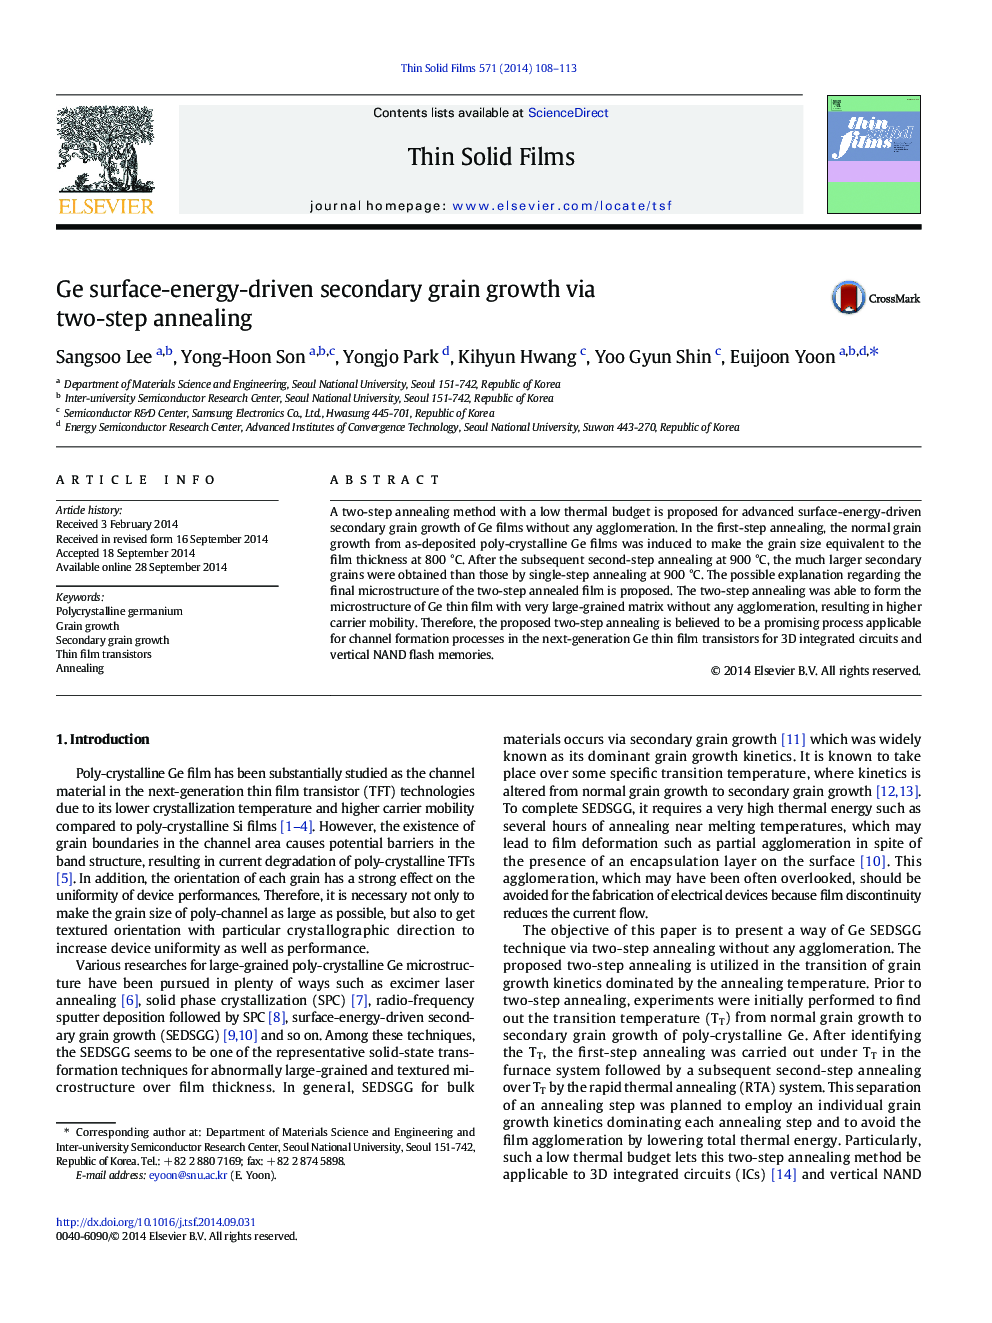 Ge surface-energy-driven secondary grain growth via two-step annealing